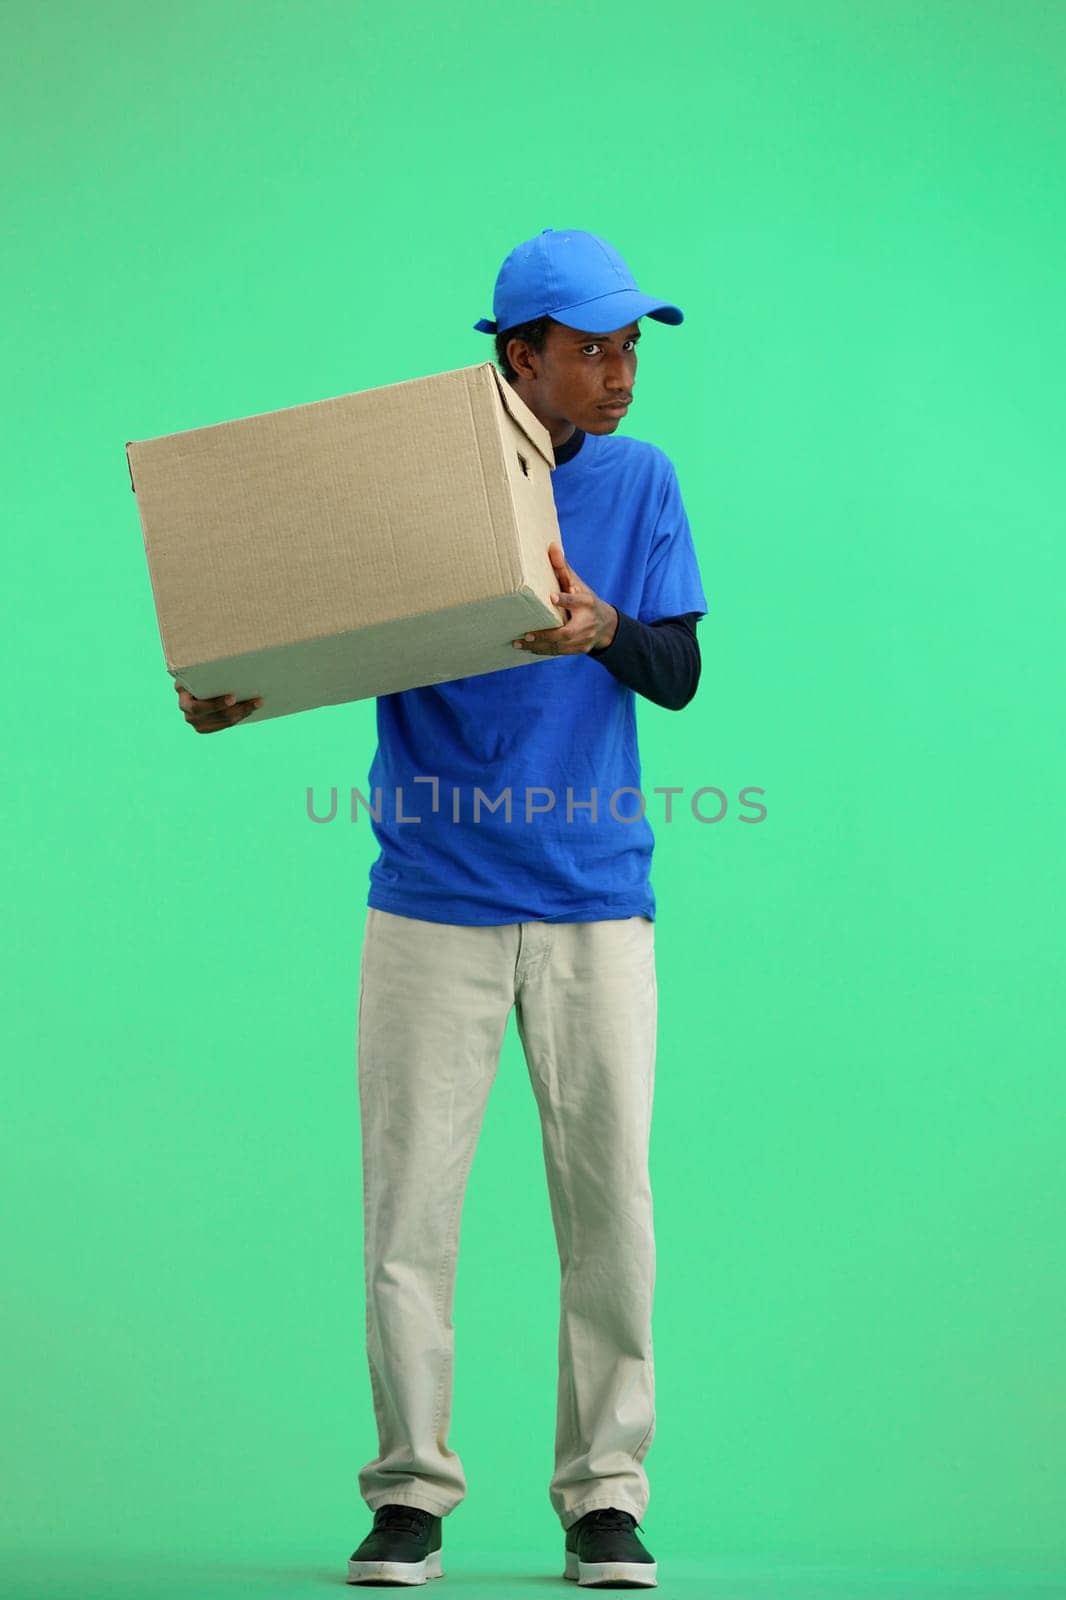 The deliveryman, in full height, on a green background, examines the box.